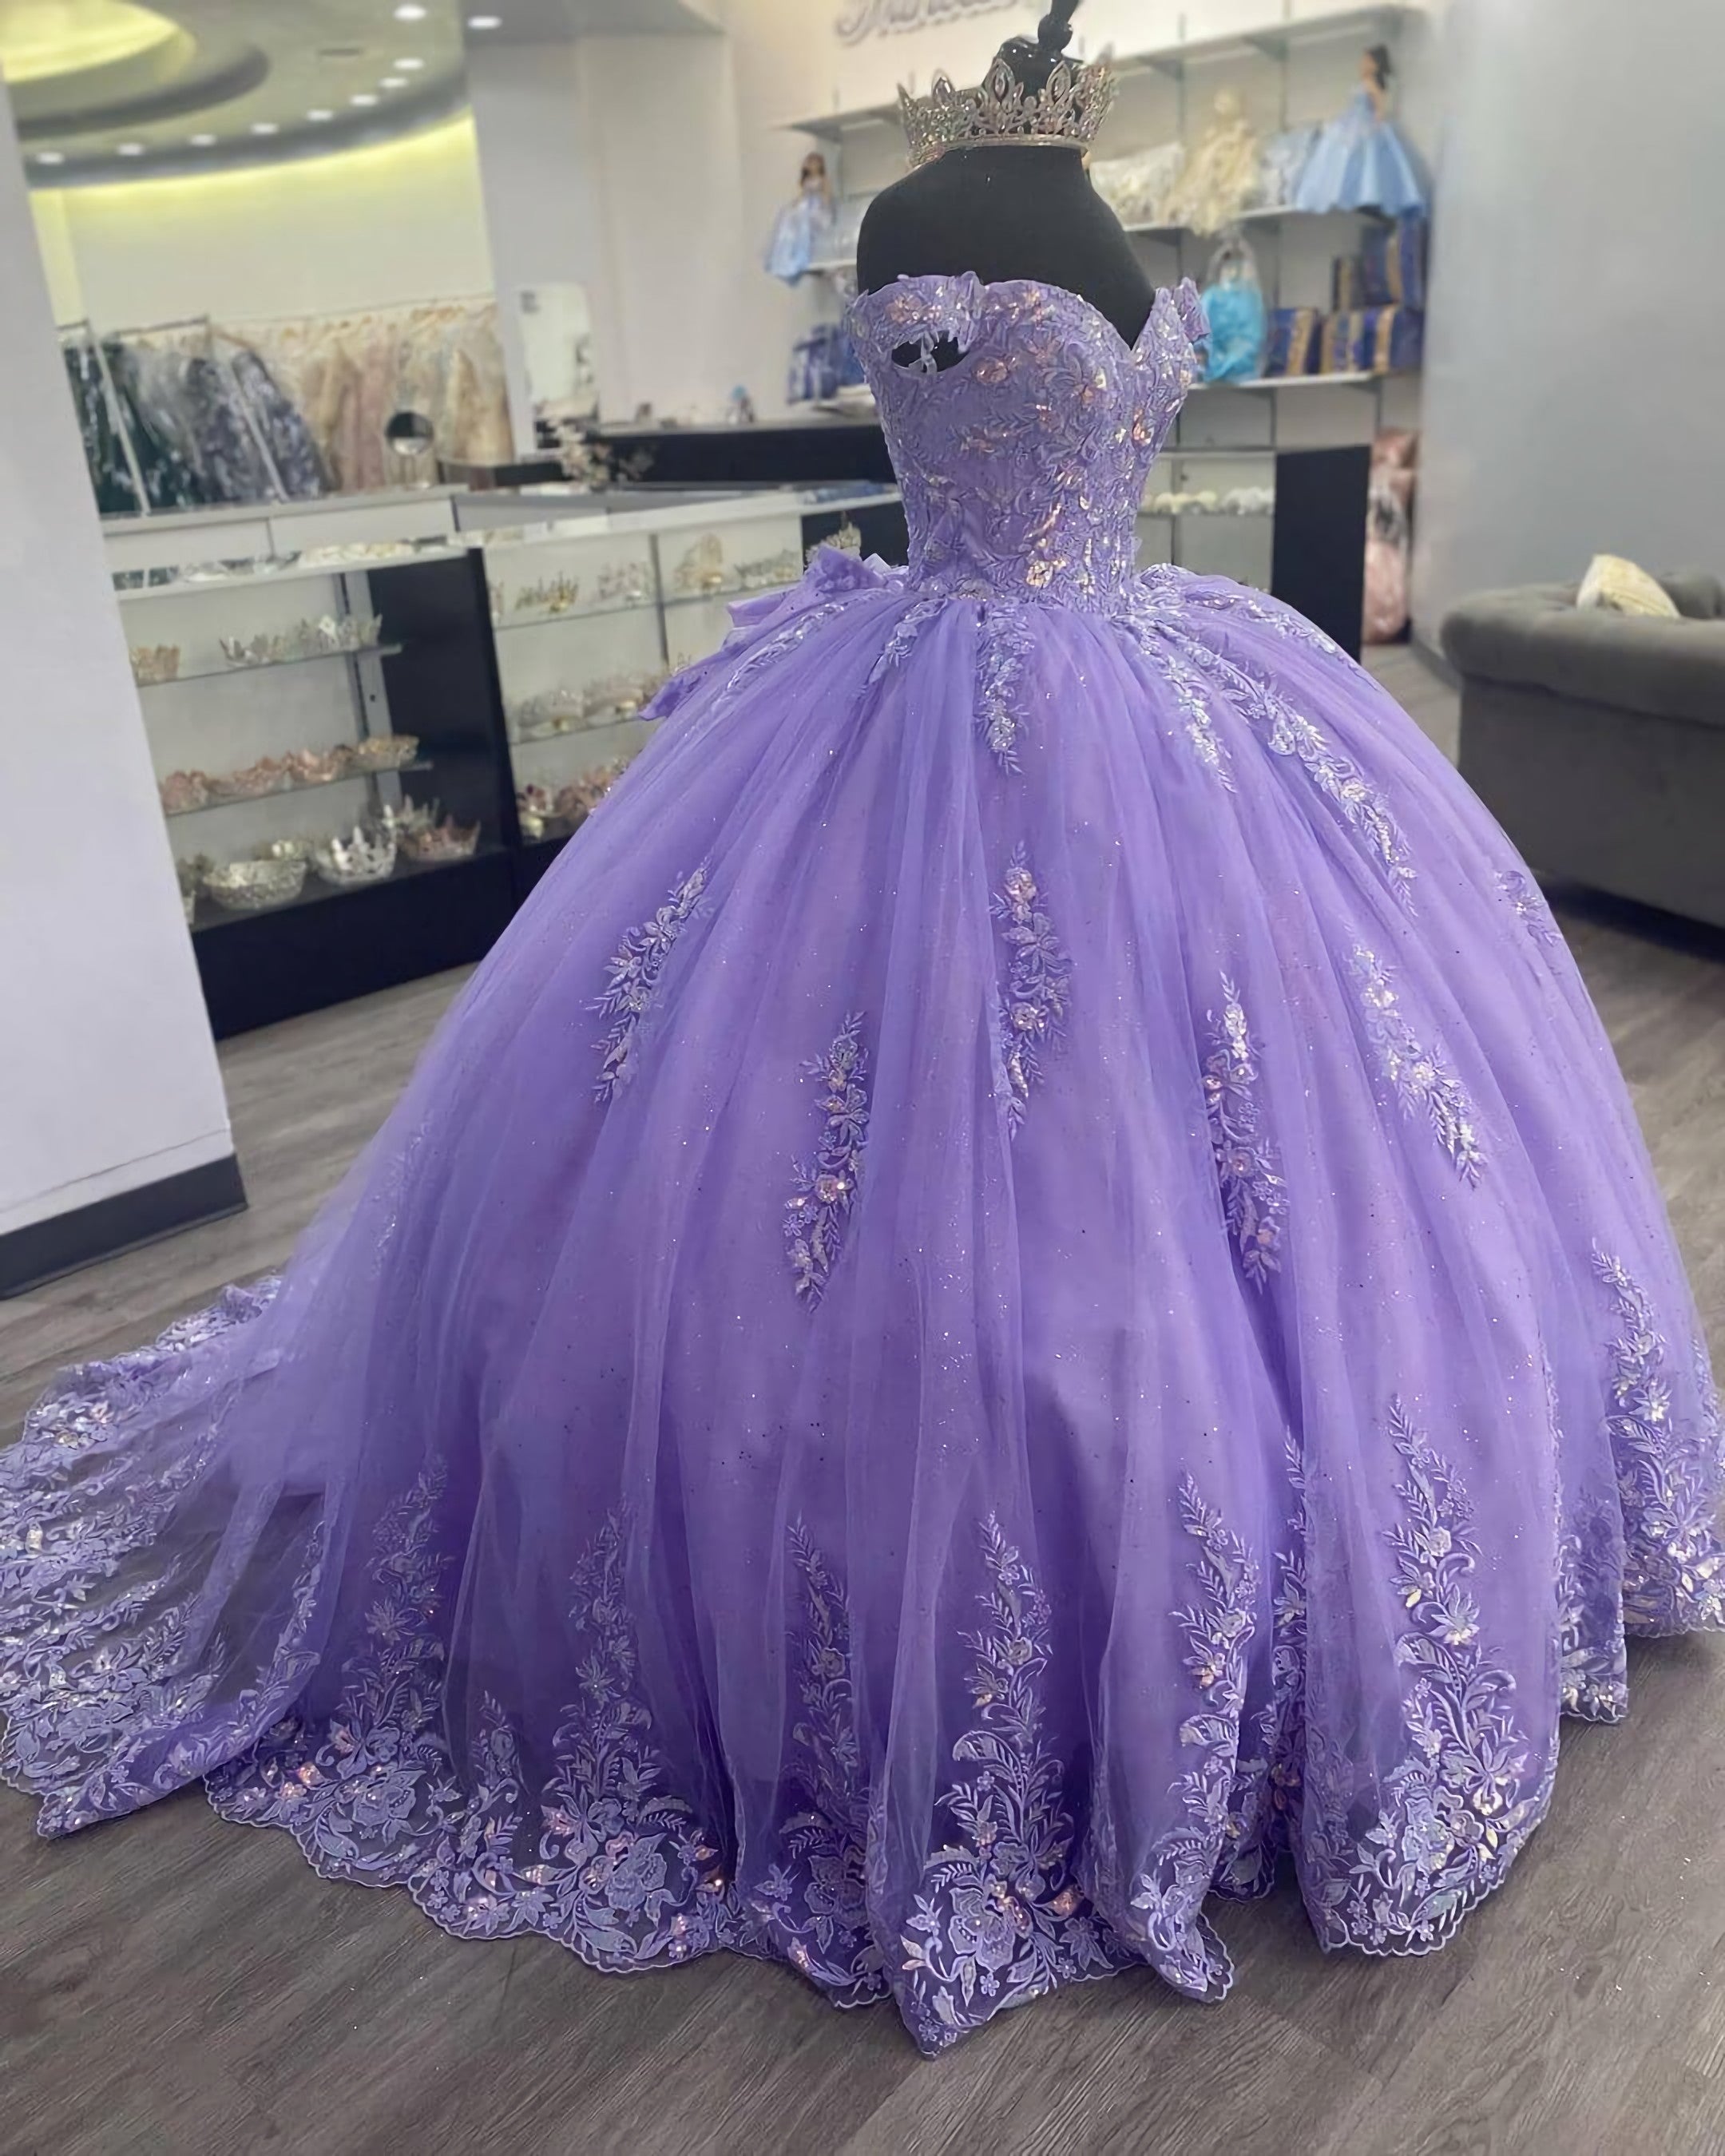 Party Dress Black, Lilac Corset Mexican Quinceanera Dress Ball Gown